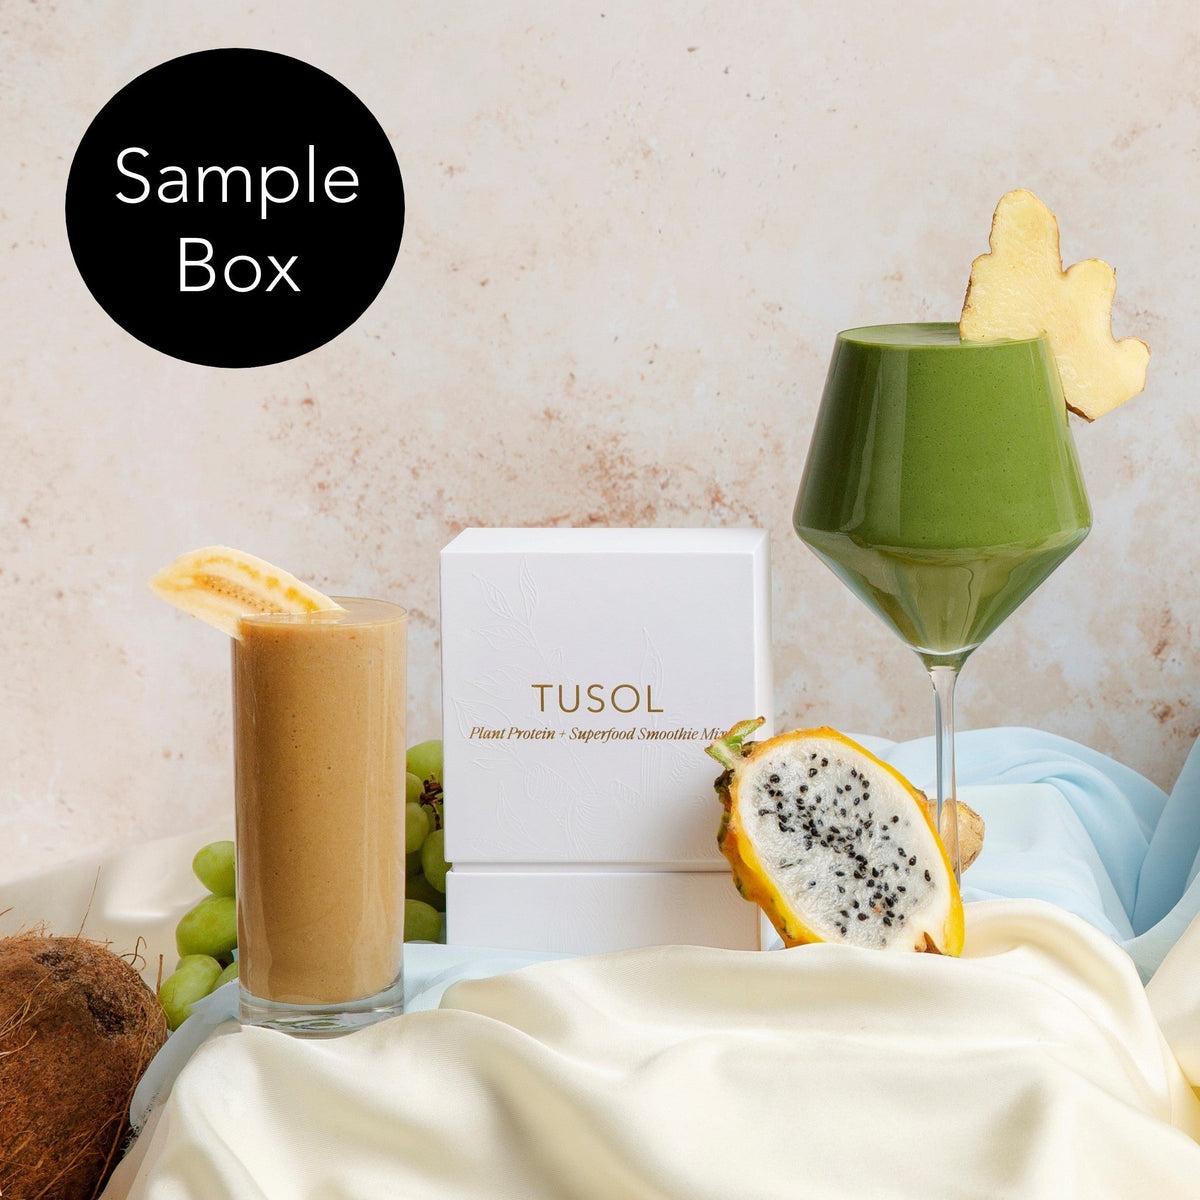 TUSOL Organic Plant Protein + Superfood Smoothie Mix